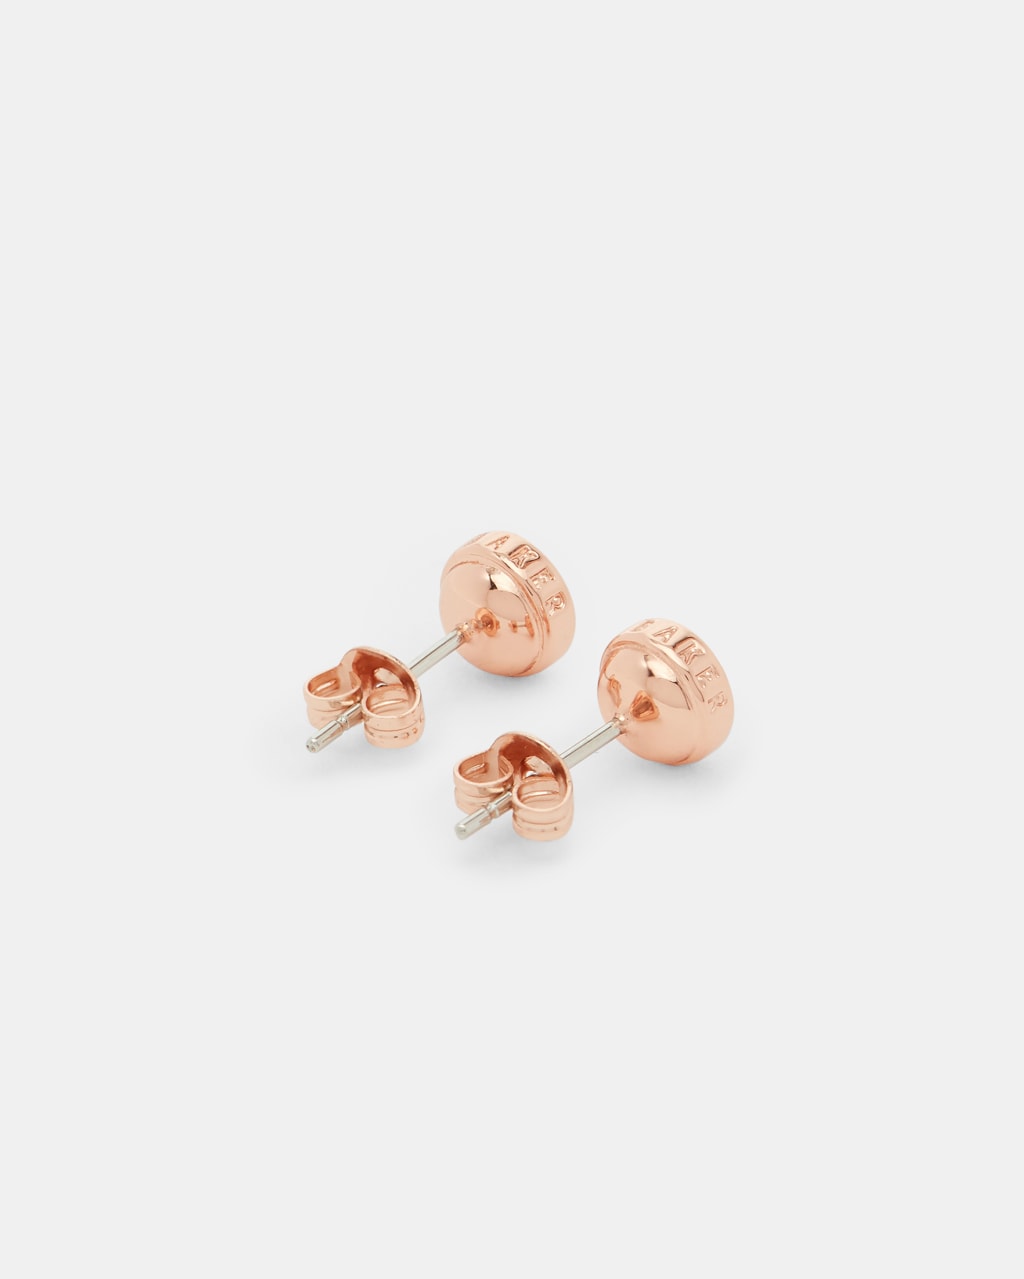 Sinaa Crystal Stud Earring in Rose Gold | eightywingold - official partner of Ted Baker